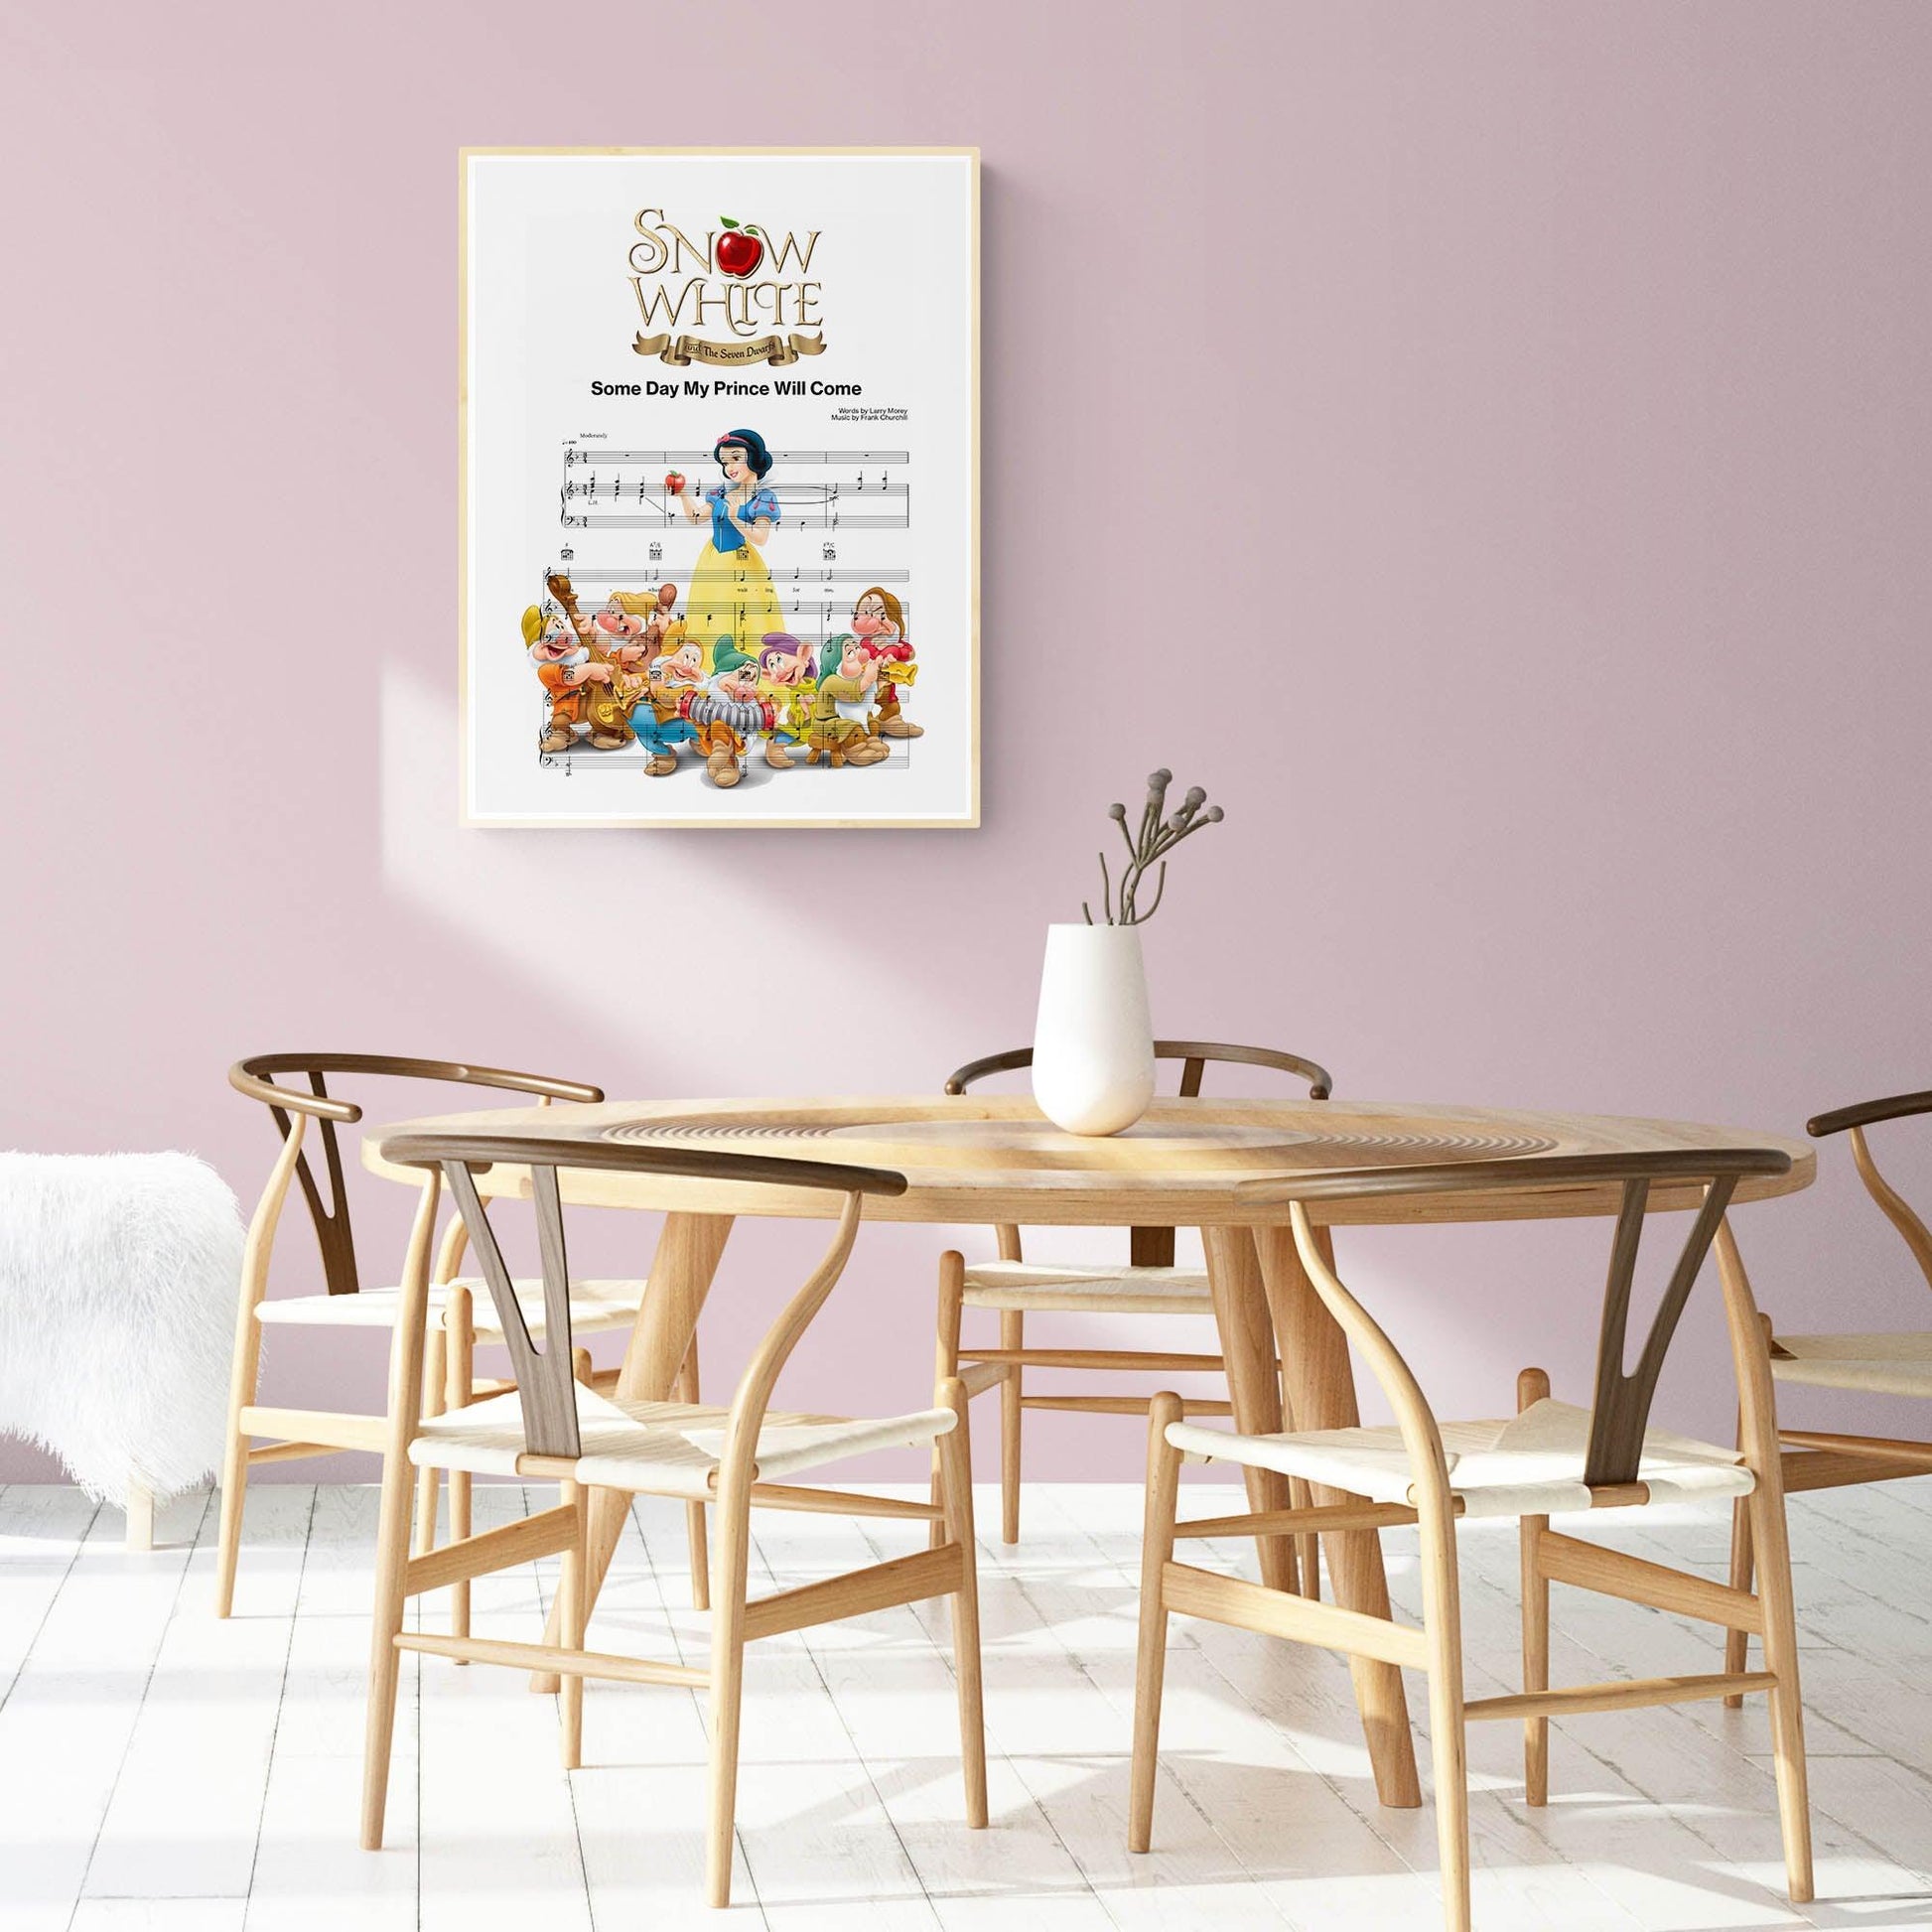 This Snow White poster is the perfect addition to your home décor if you love all things Disney. Featuring the lyrics to the song “Someday My Prince Will Come,” this print is a beautiful tribute to one of Disney’s most beloved animated films. Hang it in your home and dream of happily ever after.